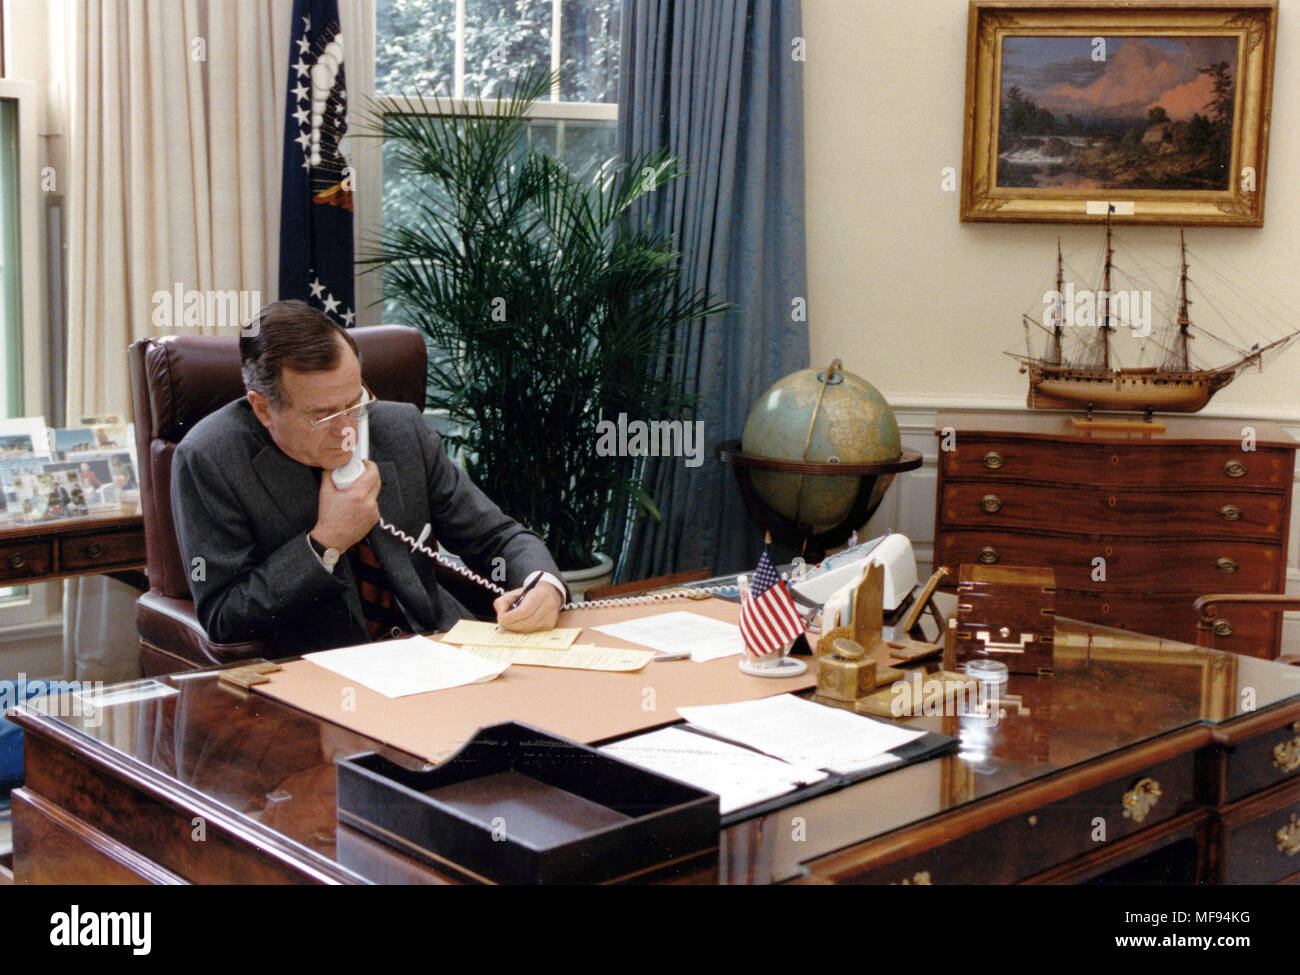 Washington, District of Columbia, USA. 22nd Feb, 1991. United States President GEORGE H.W. BUSH speaks with President Gorbachev of the Union of Soviet Socialist Republics (U.S.S.R.) concerning the Persian Gulf situation on February 22, 1991. Credit: Susan Biddle/CNP/ZUMA Wire/Alamy Live News Stock Photo